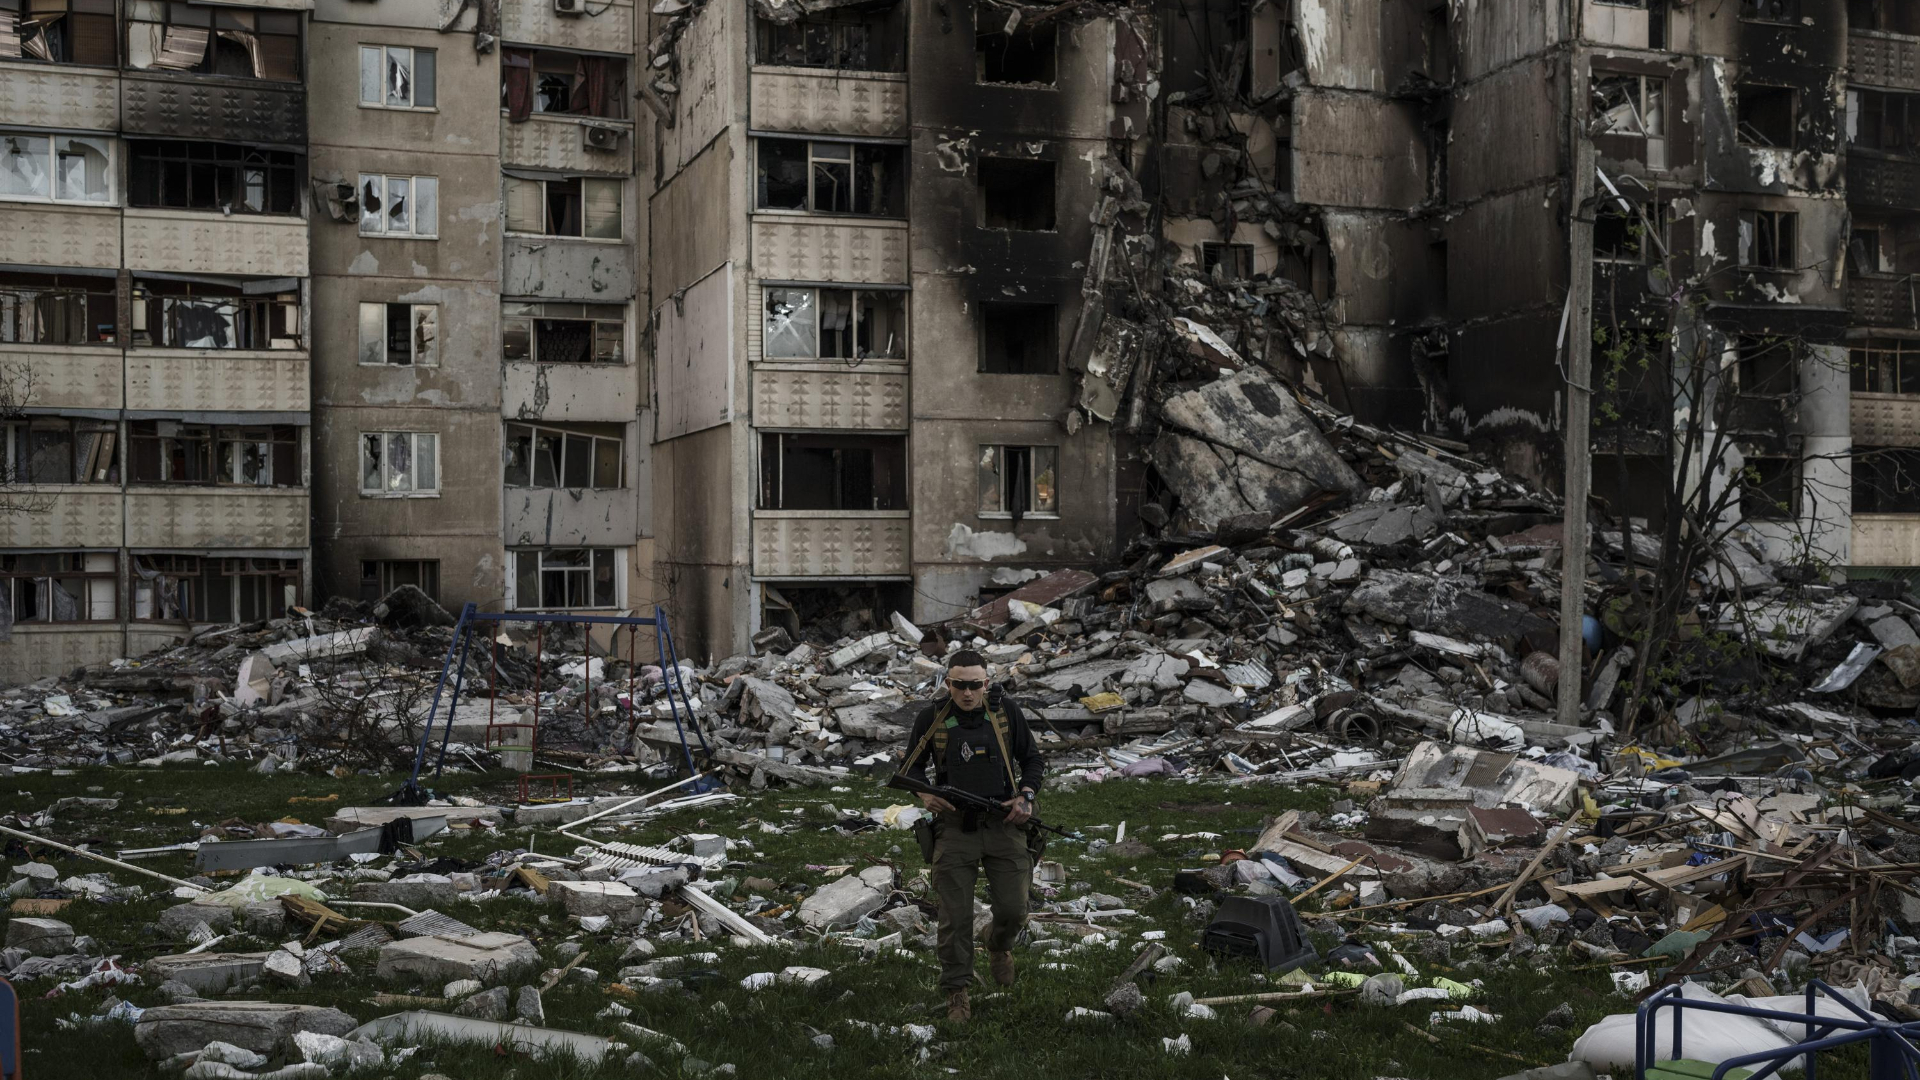 A volunteer reflects on her time helping people in Ukraine